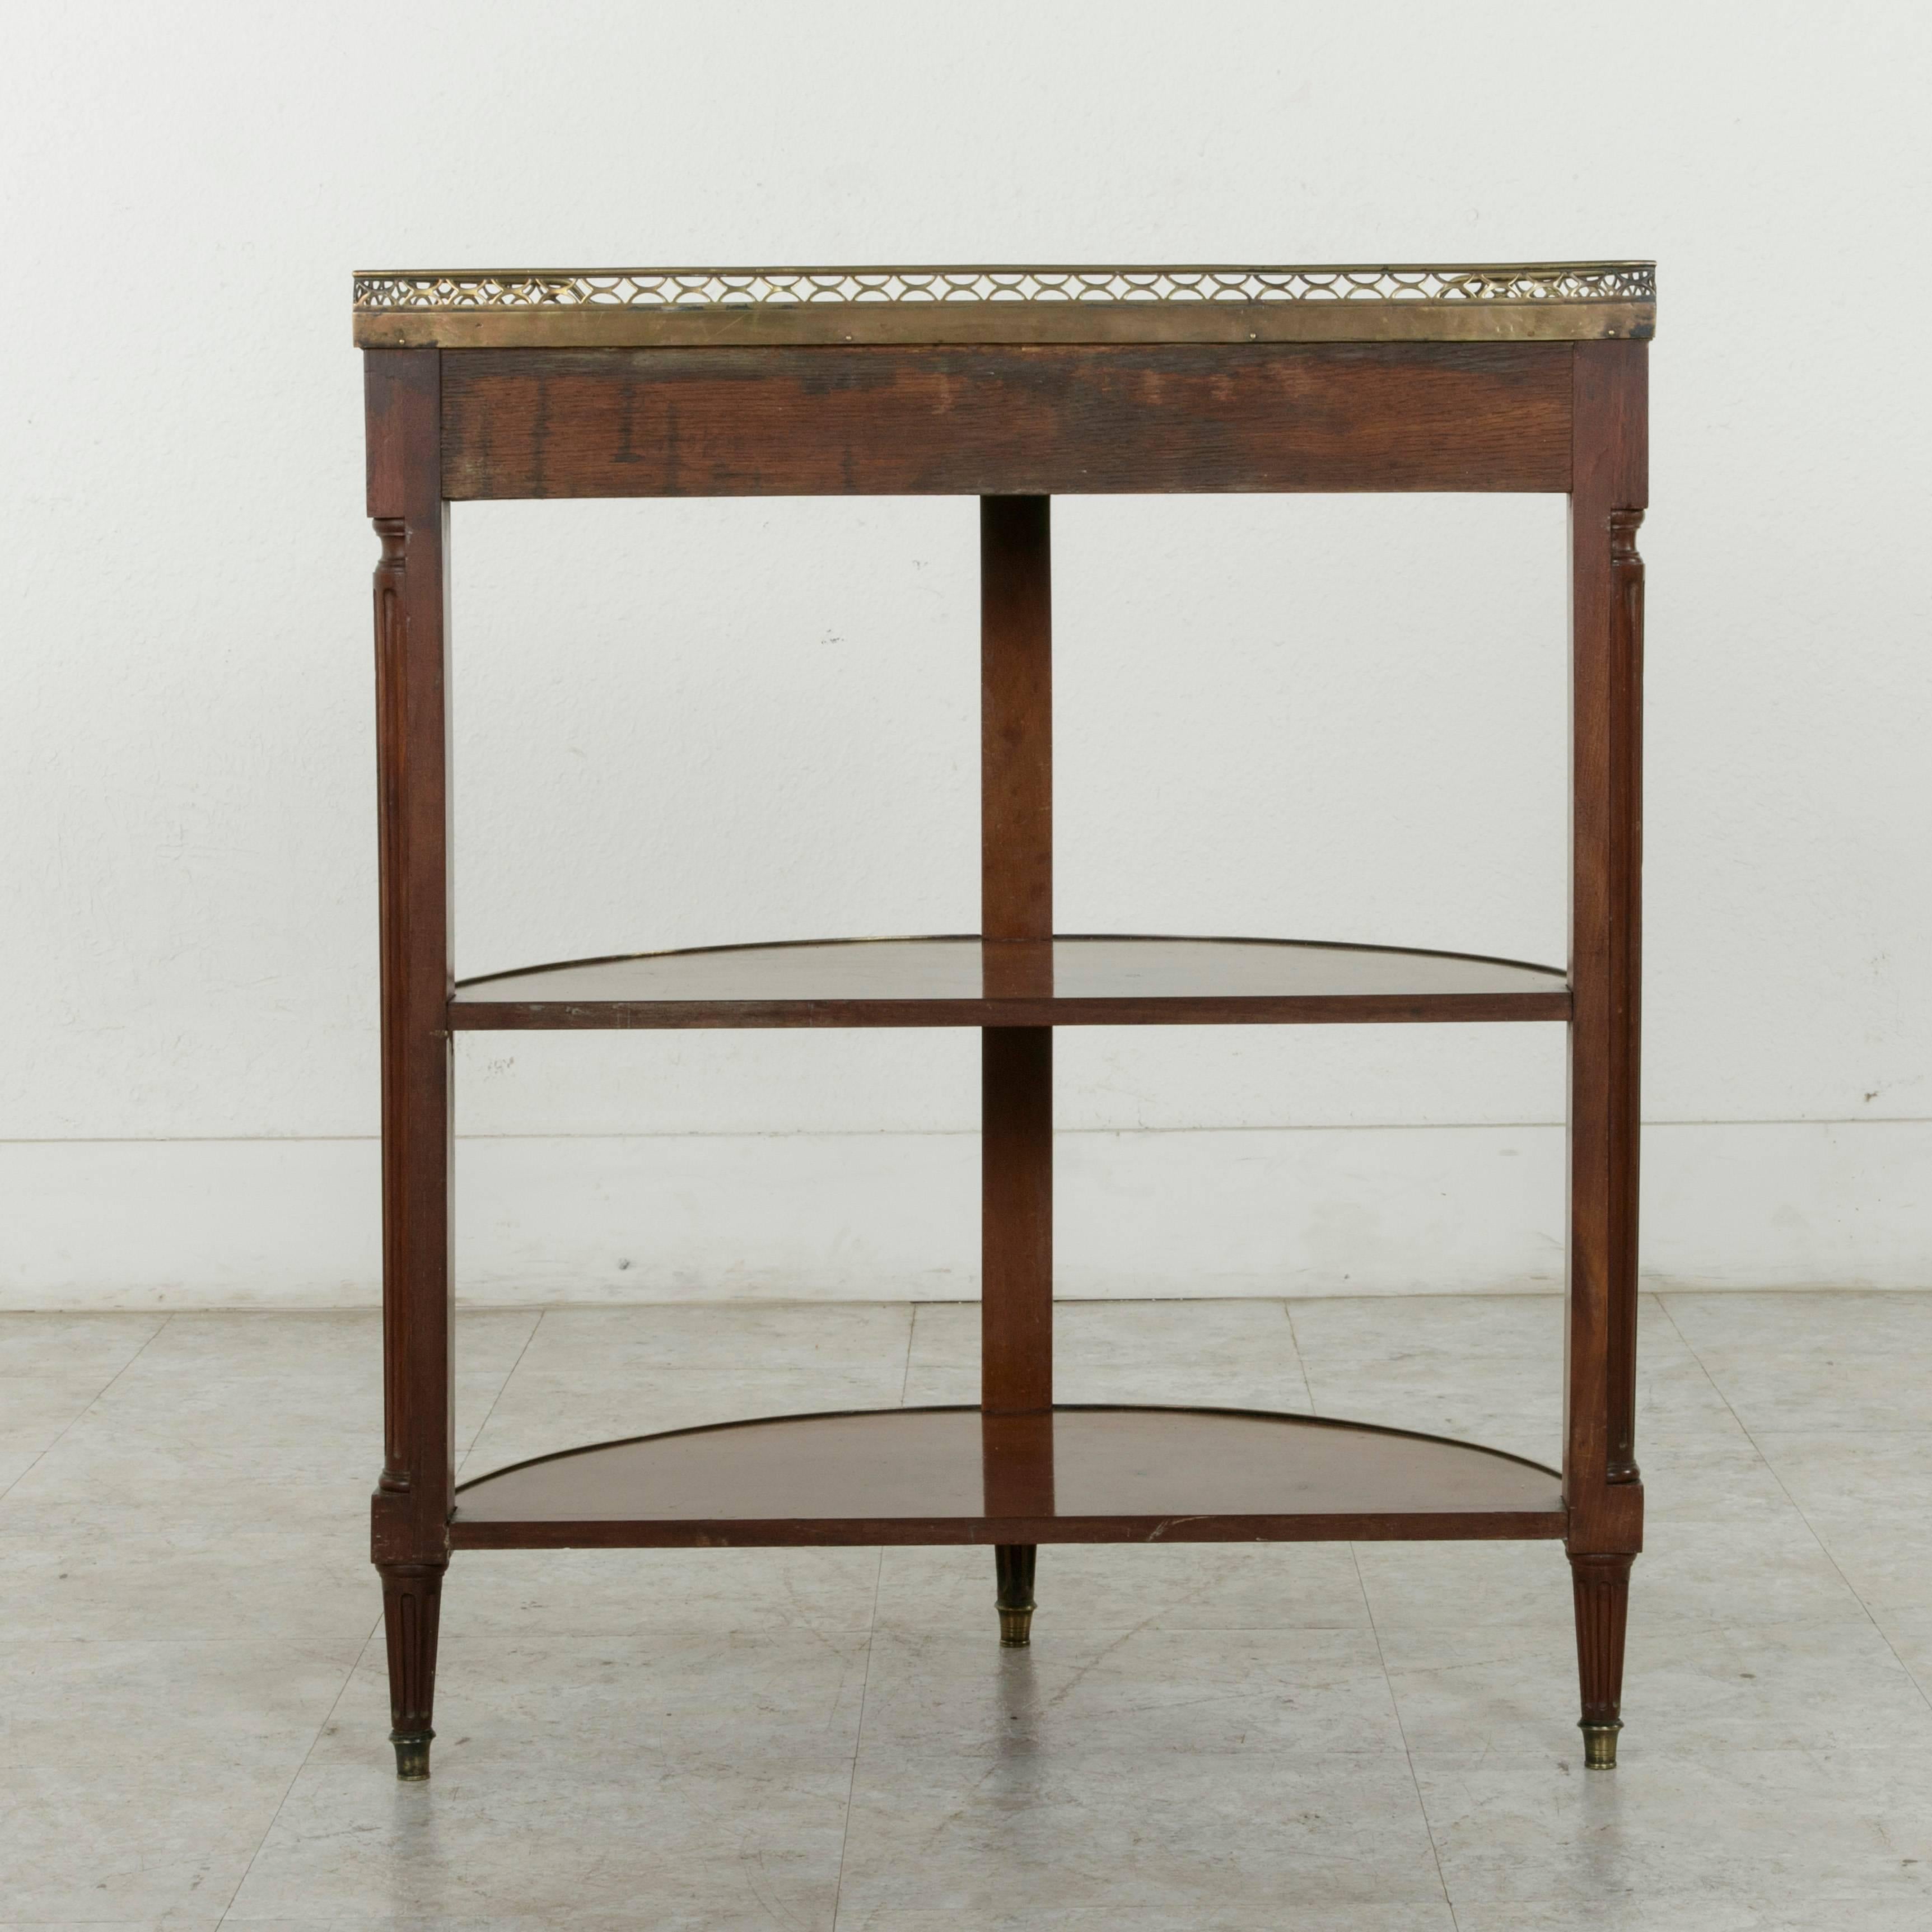 Bronze 19th Century French Louis XVI Style Mahogany Demilune Console Table, Marble Top